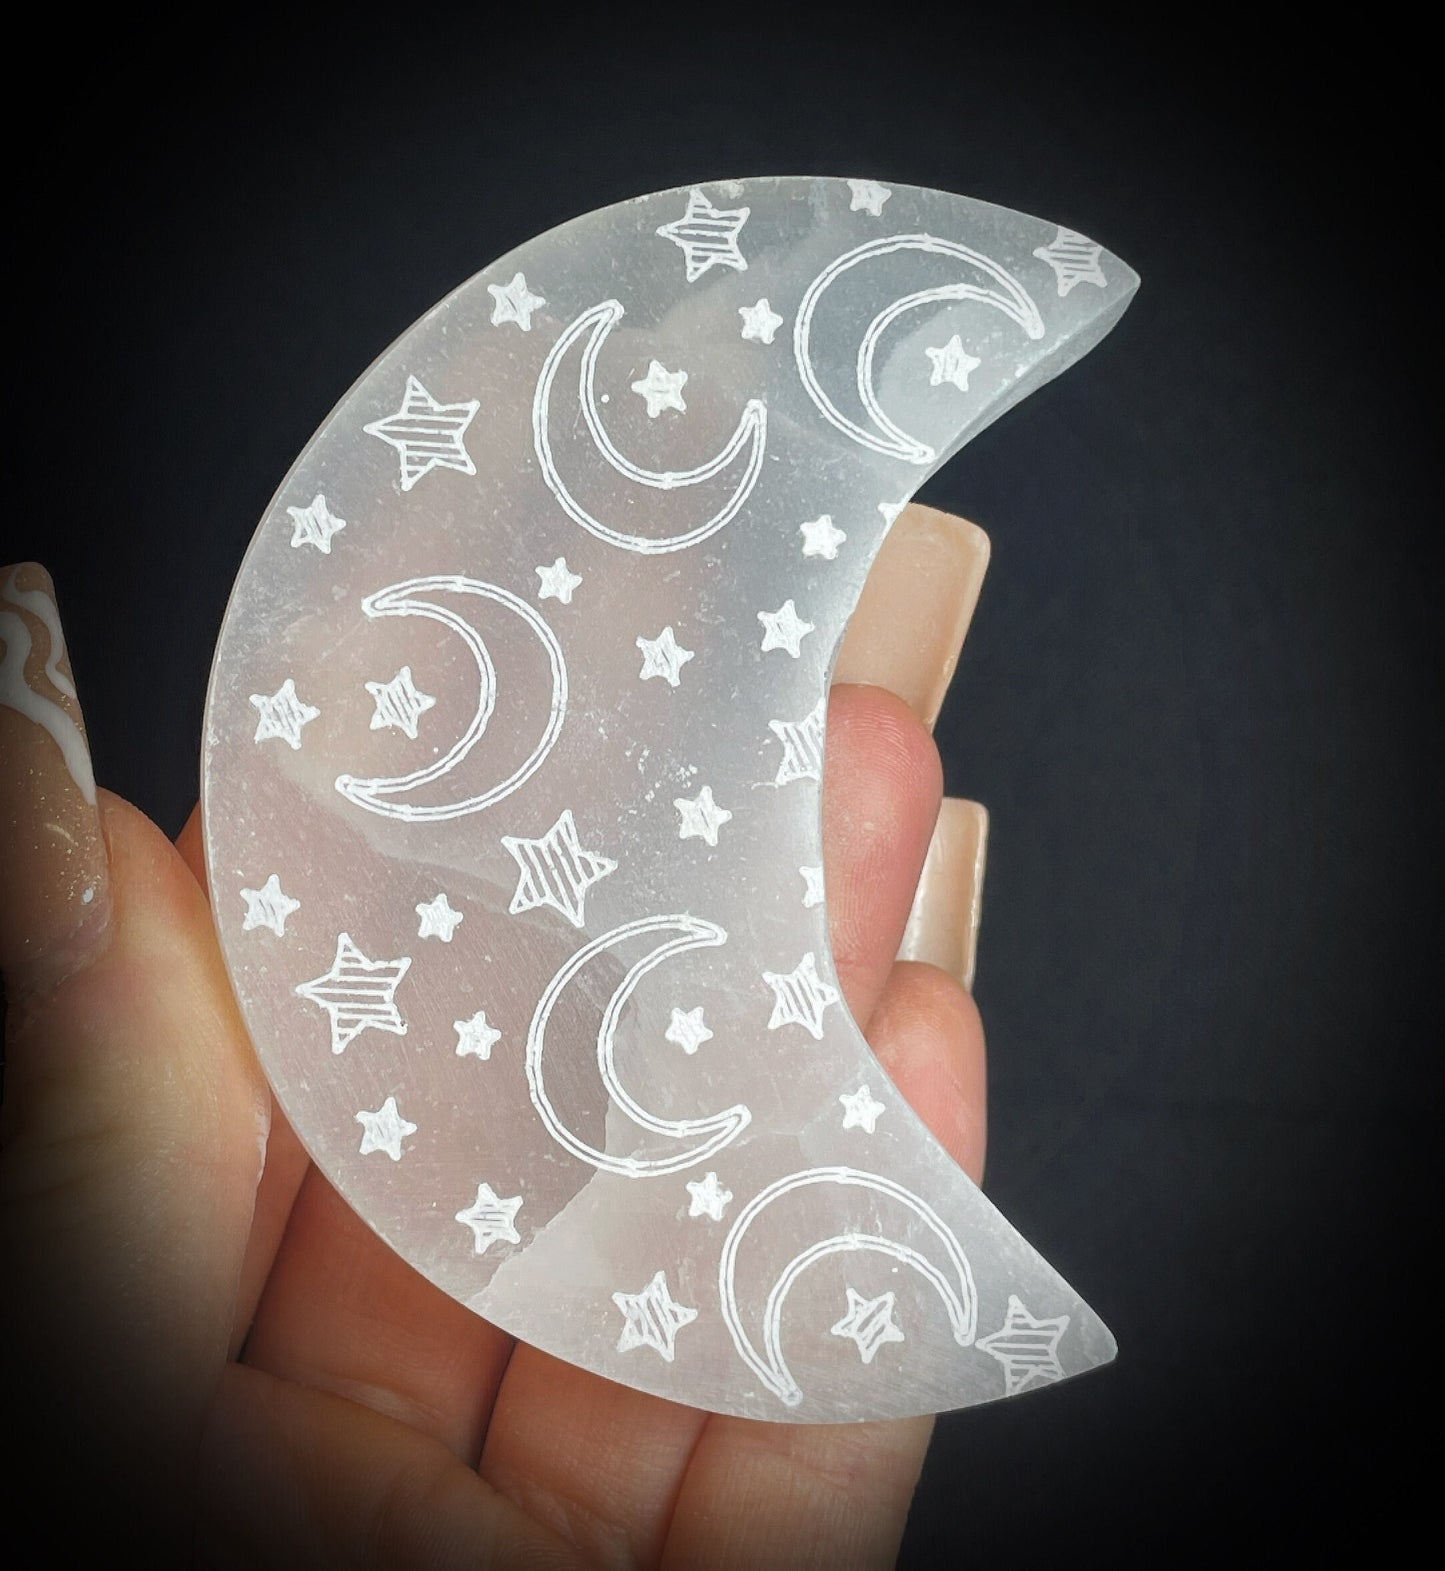 Gorgeous Selenite Half Crescent Moon shaped Patterned Crystal Charging Plate disc From Morocco- Sold Individually